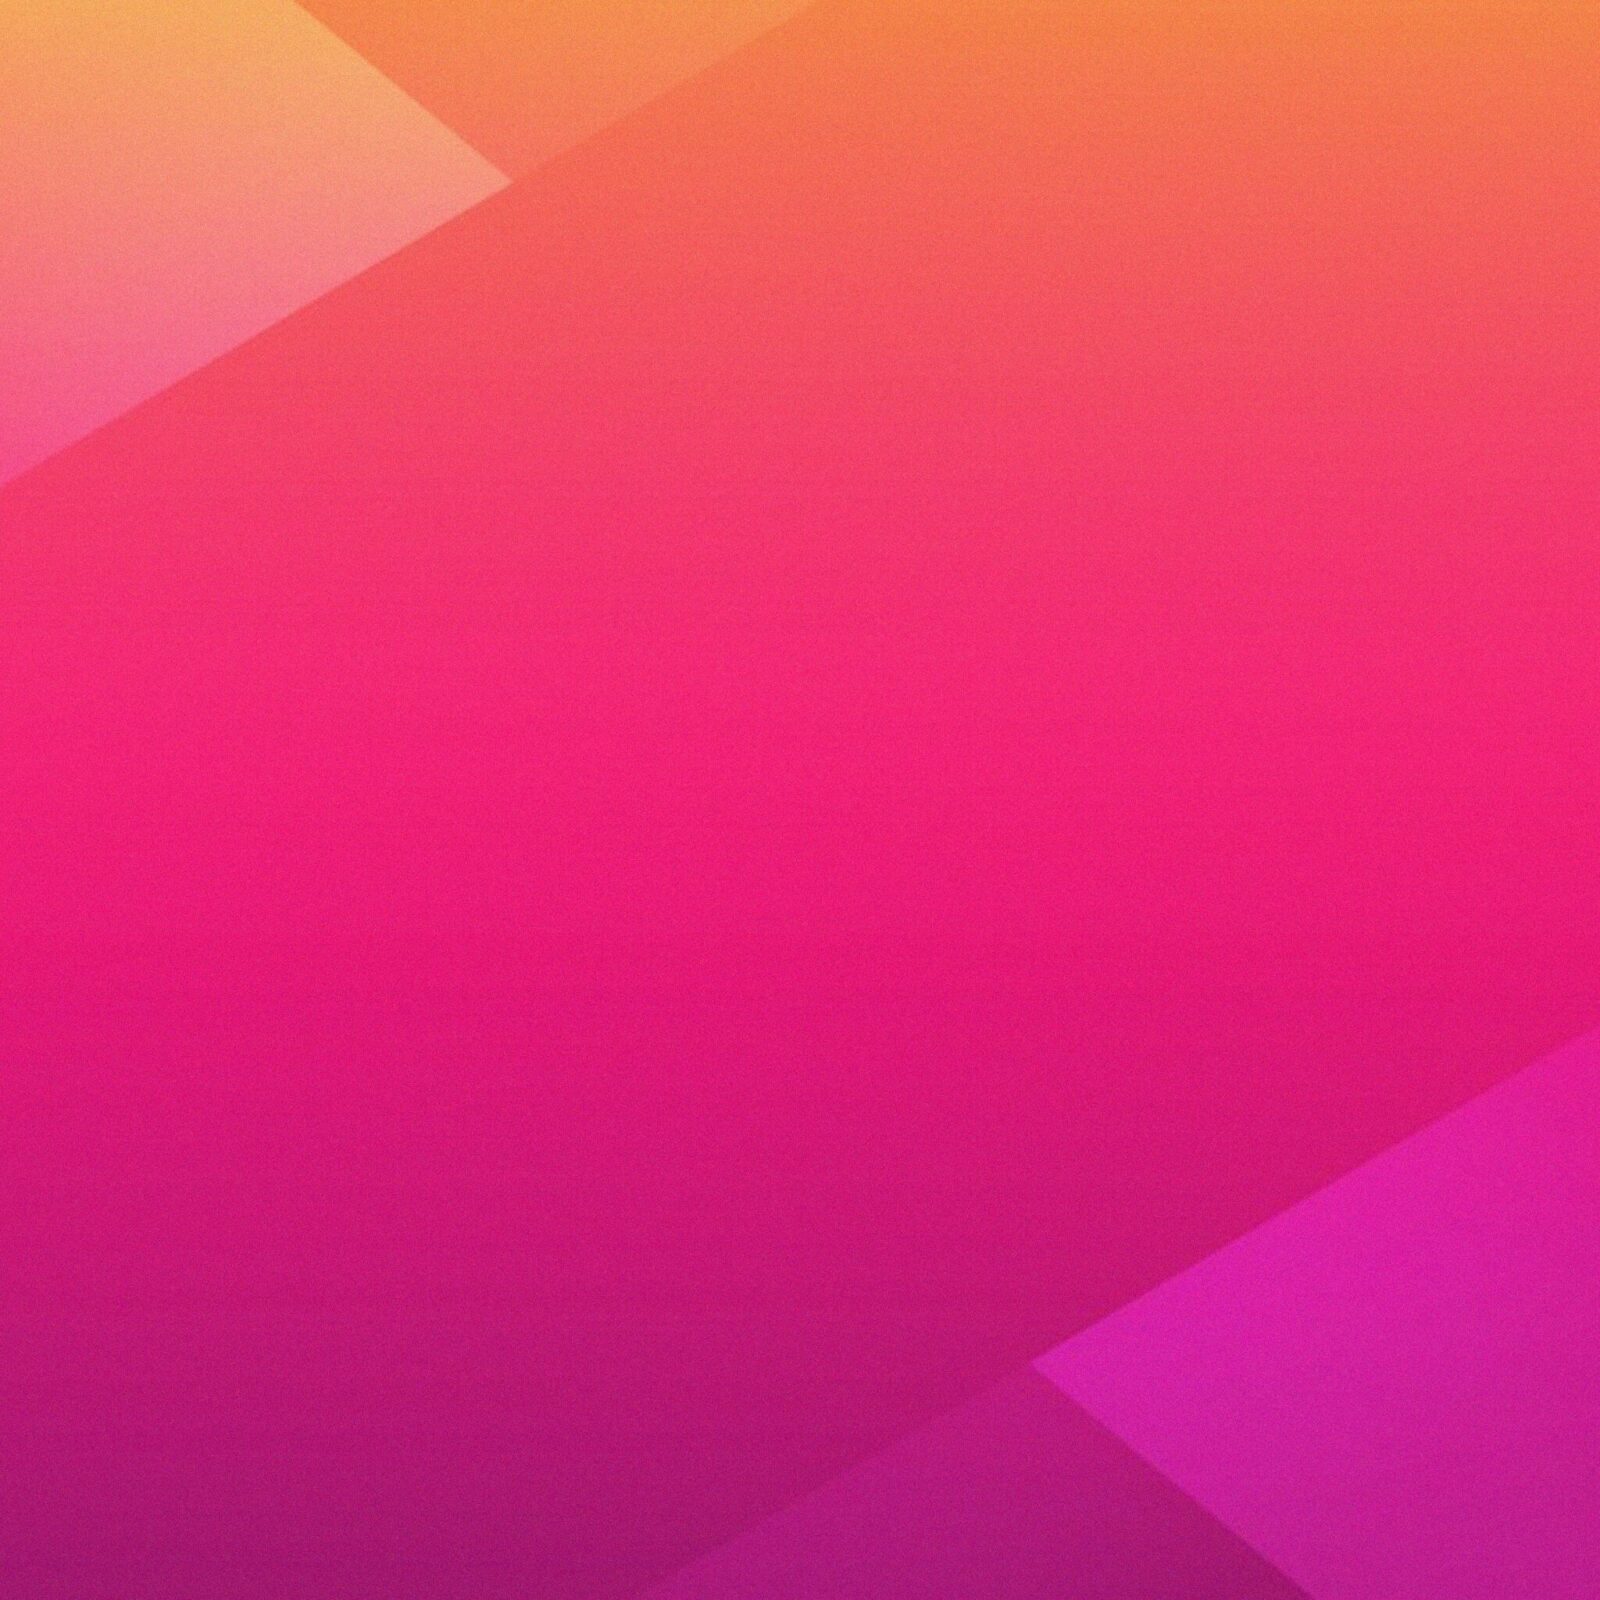 Pink Abstract wallpaper fond android